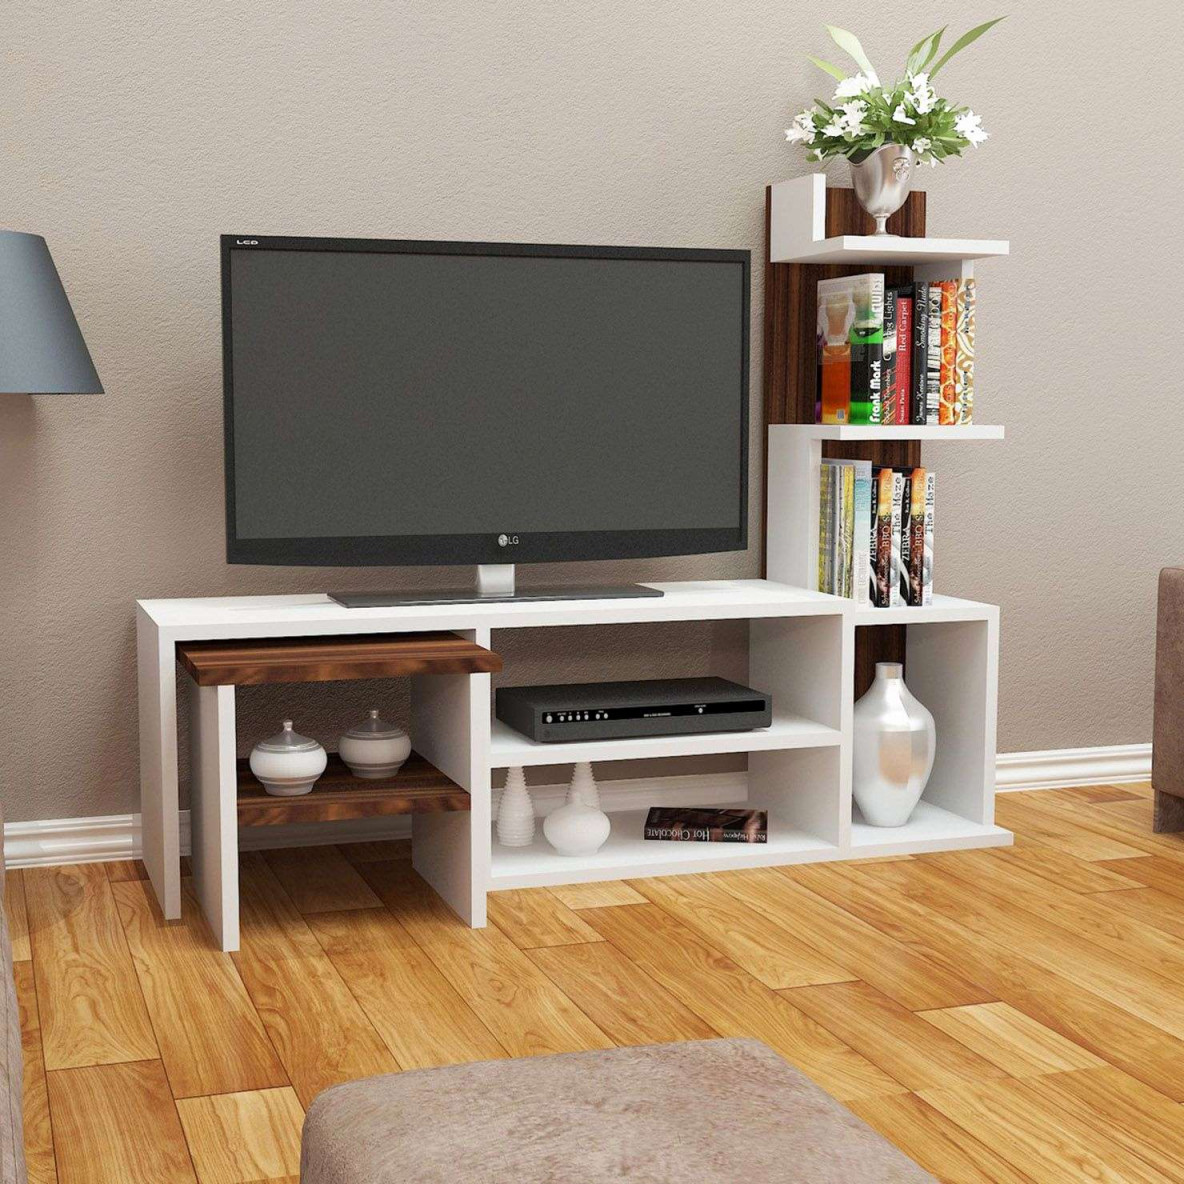 Floating Fireplace Tv Stand New Round Tv Stand Impressionnant 40 Neu Tv Rack Galerie